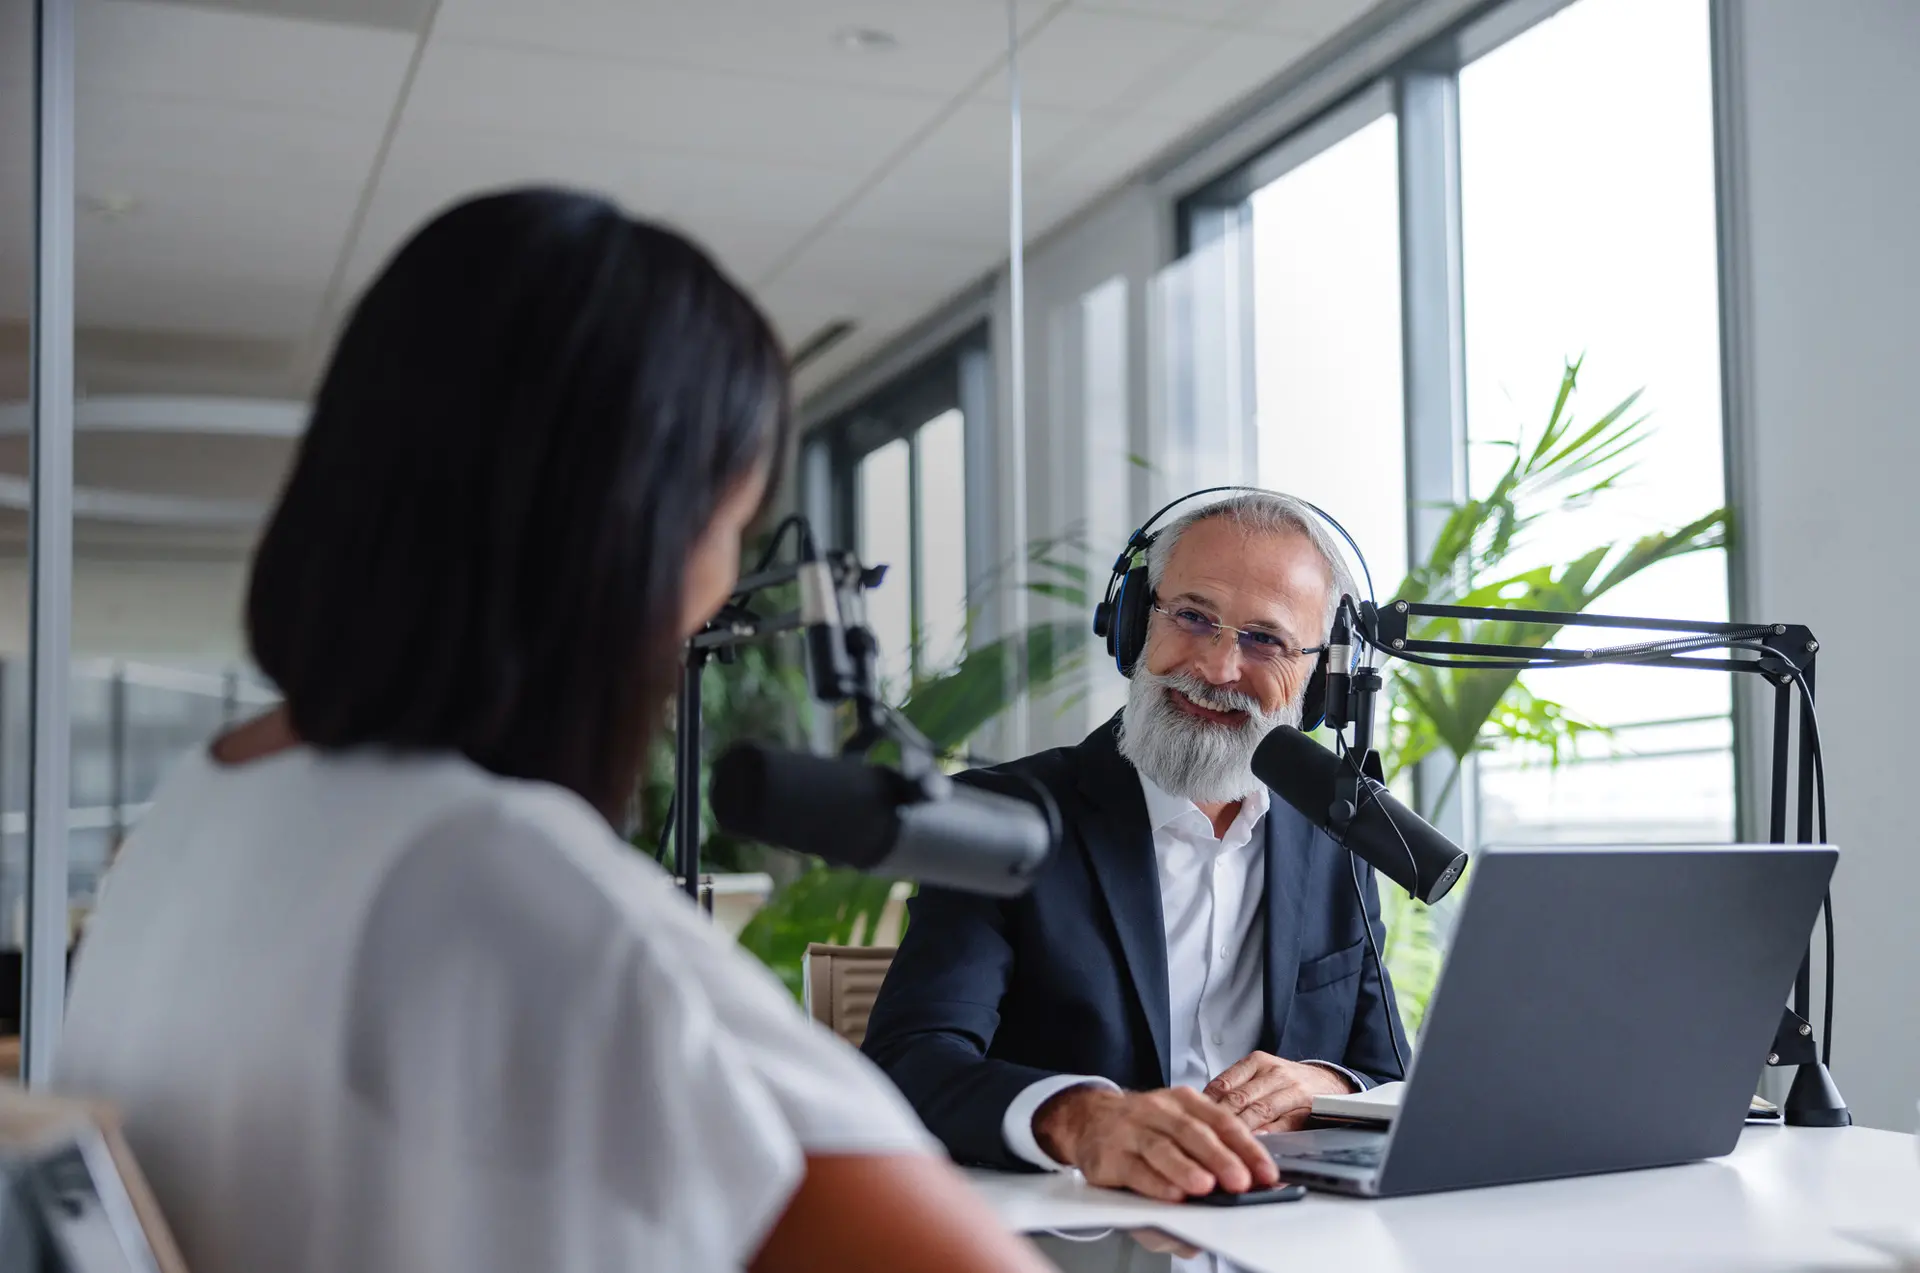 Leerink Partners Podcast - Male and Female banker on a podcast interview session